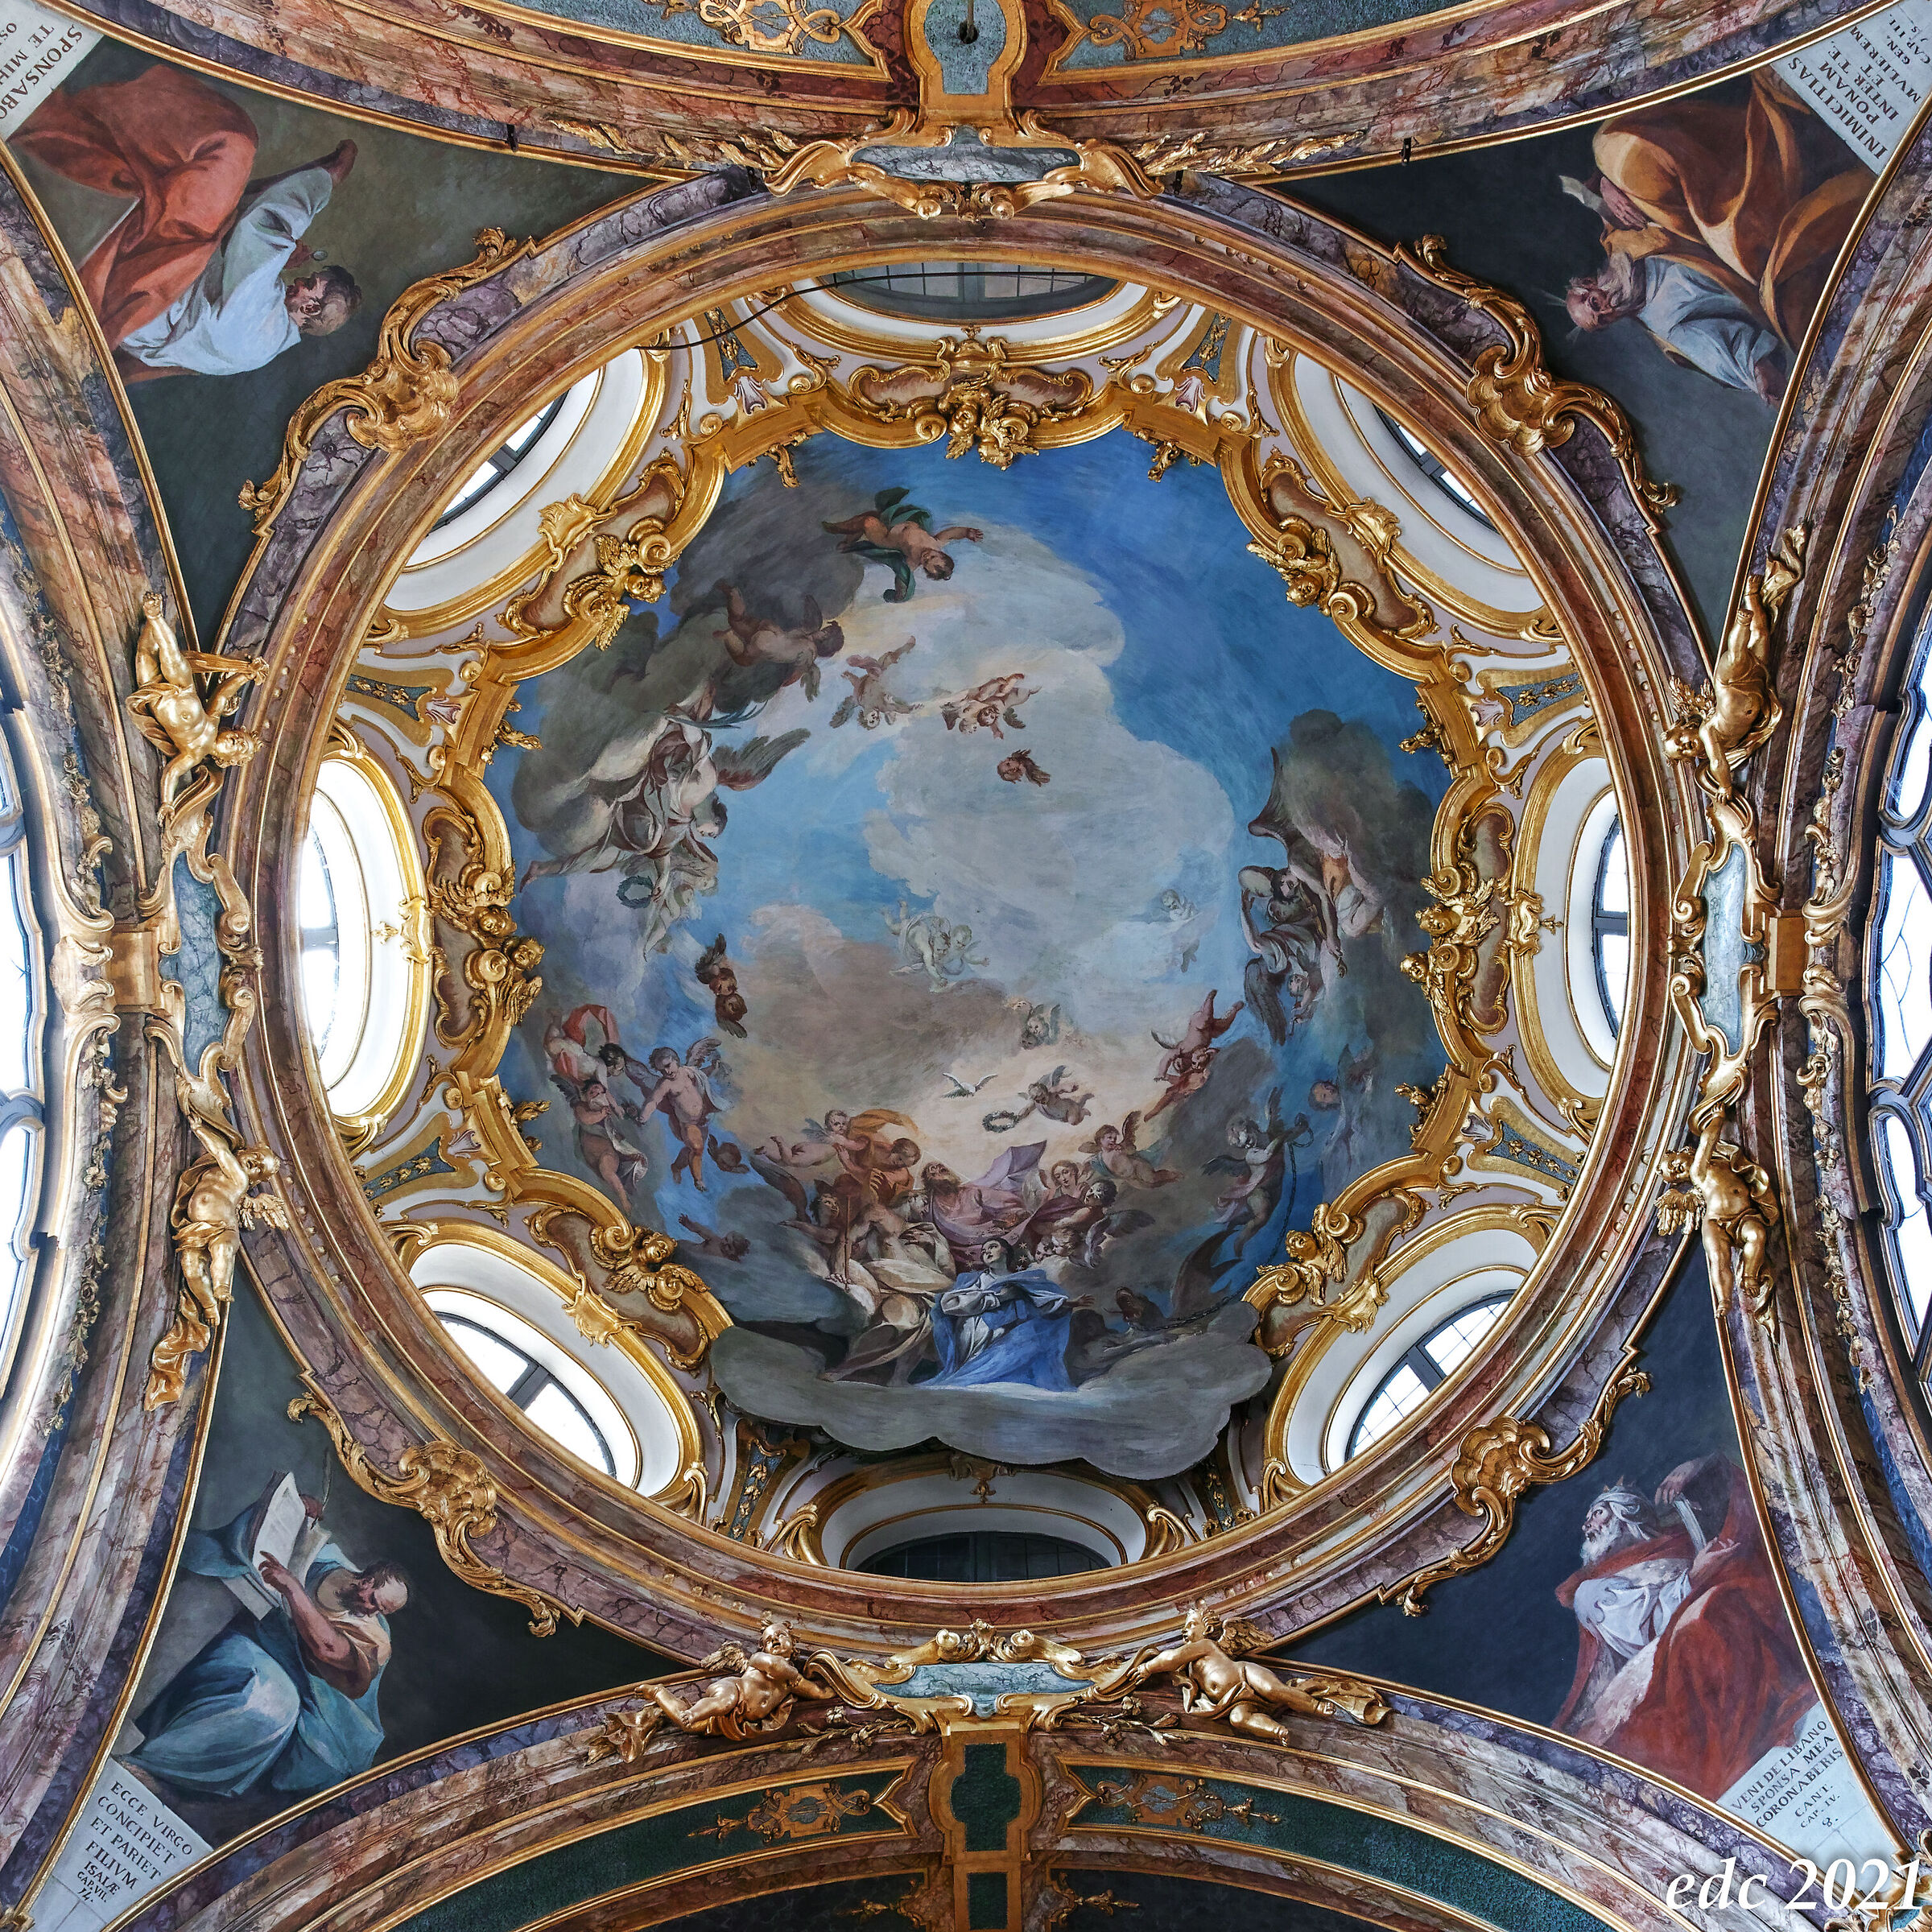 The dome of the Immaculate Conception in S. Francesco di Pavia...